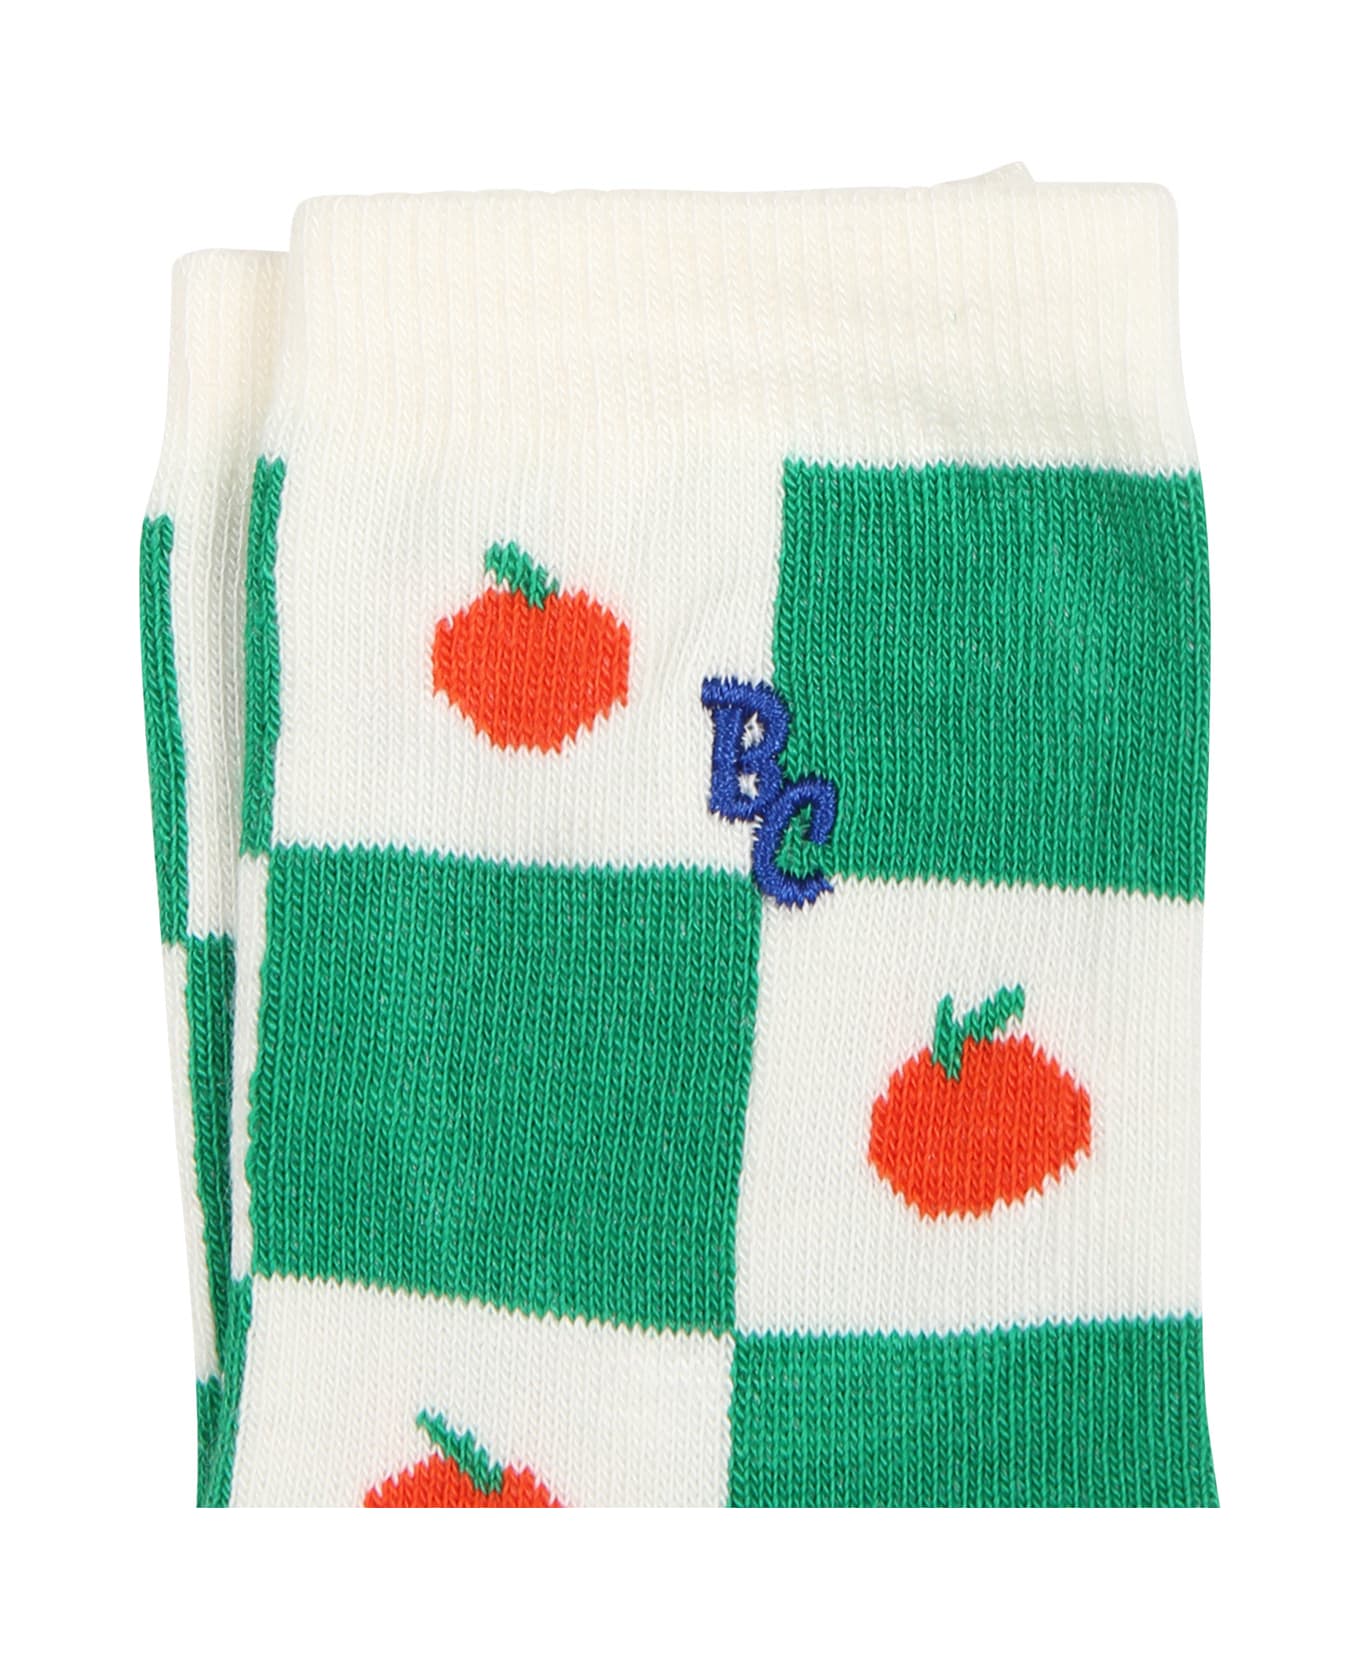 Bobo Choses Green Socks For Kids With Tomatoes - Multicolor